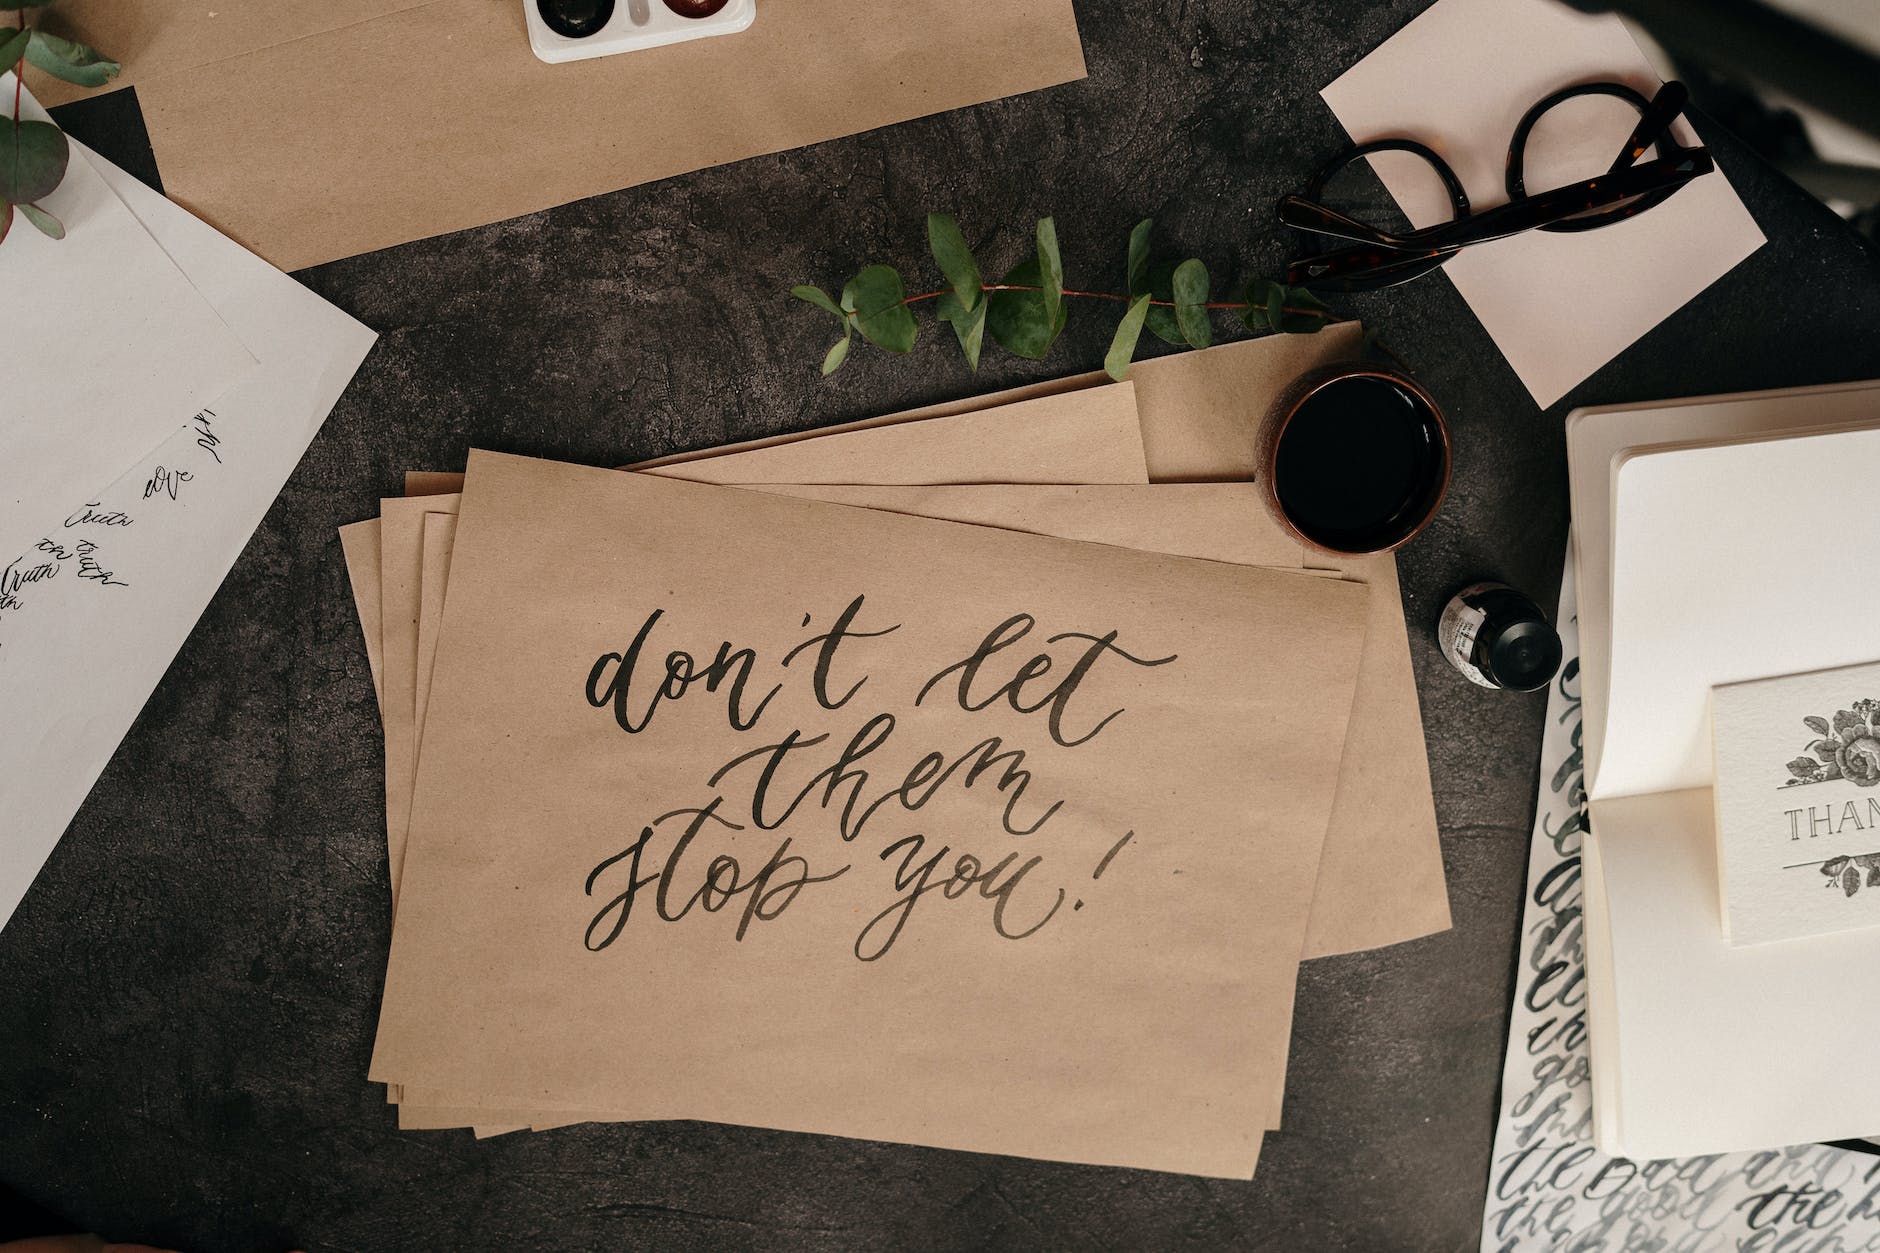 Calligraphy Quotes: Adding Meaning and Beauty to Your Artwork, Inspiring Calligraphy Quotes